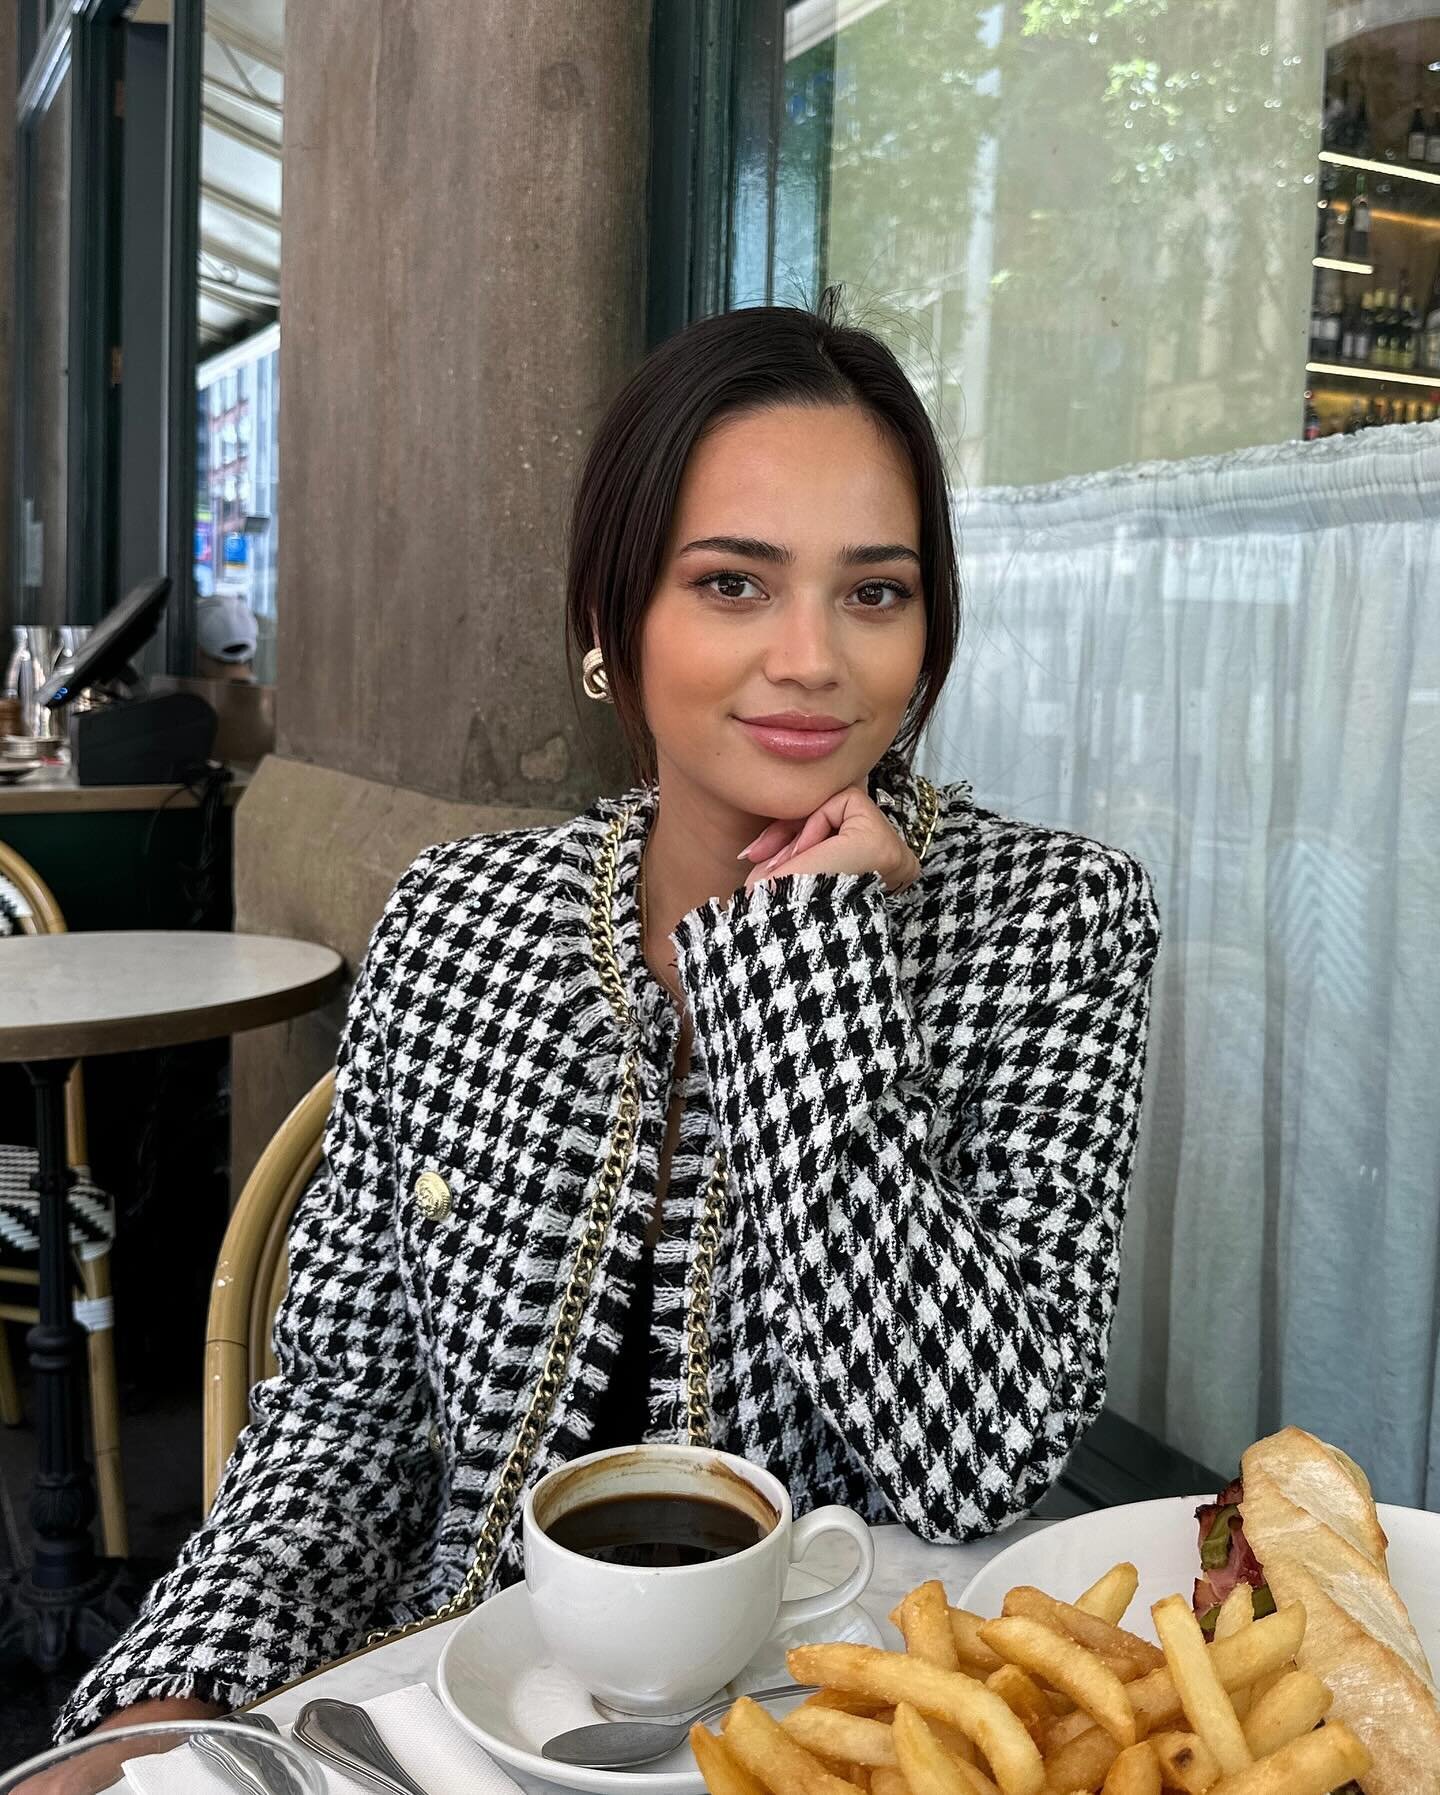 I&rsquo;ll get the fries and you get the coffee and let&rsquo;s call it a lunch date 🍟☕️ 

Jacket @rebeccavallance 
Bag @chanelofficial @rebagofficial 
Jewellery @bycharlotte_ 

#ootd #outfitinspo #classystyle #ootdfashion #chanel #chanelbag #styleo